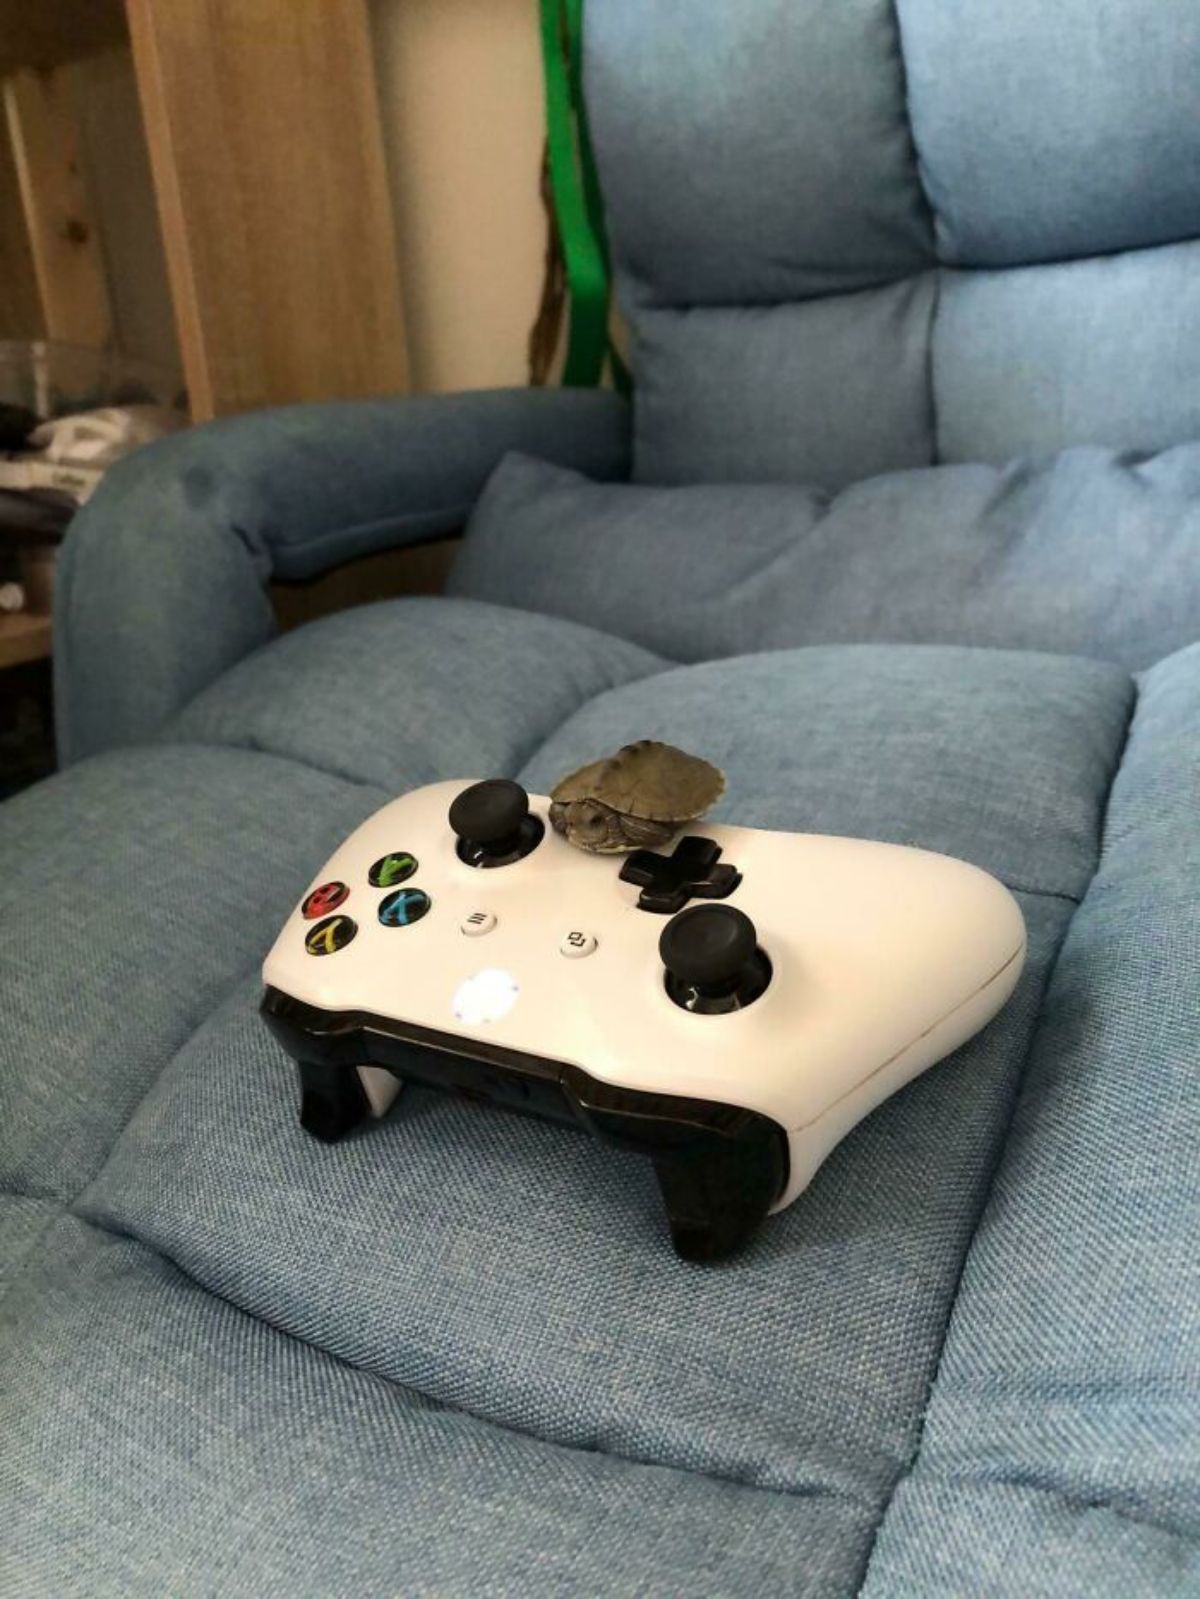 baby turtle on a game controller on a grey sofa